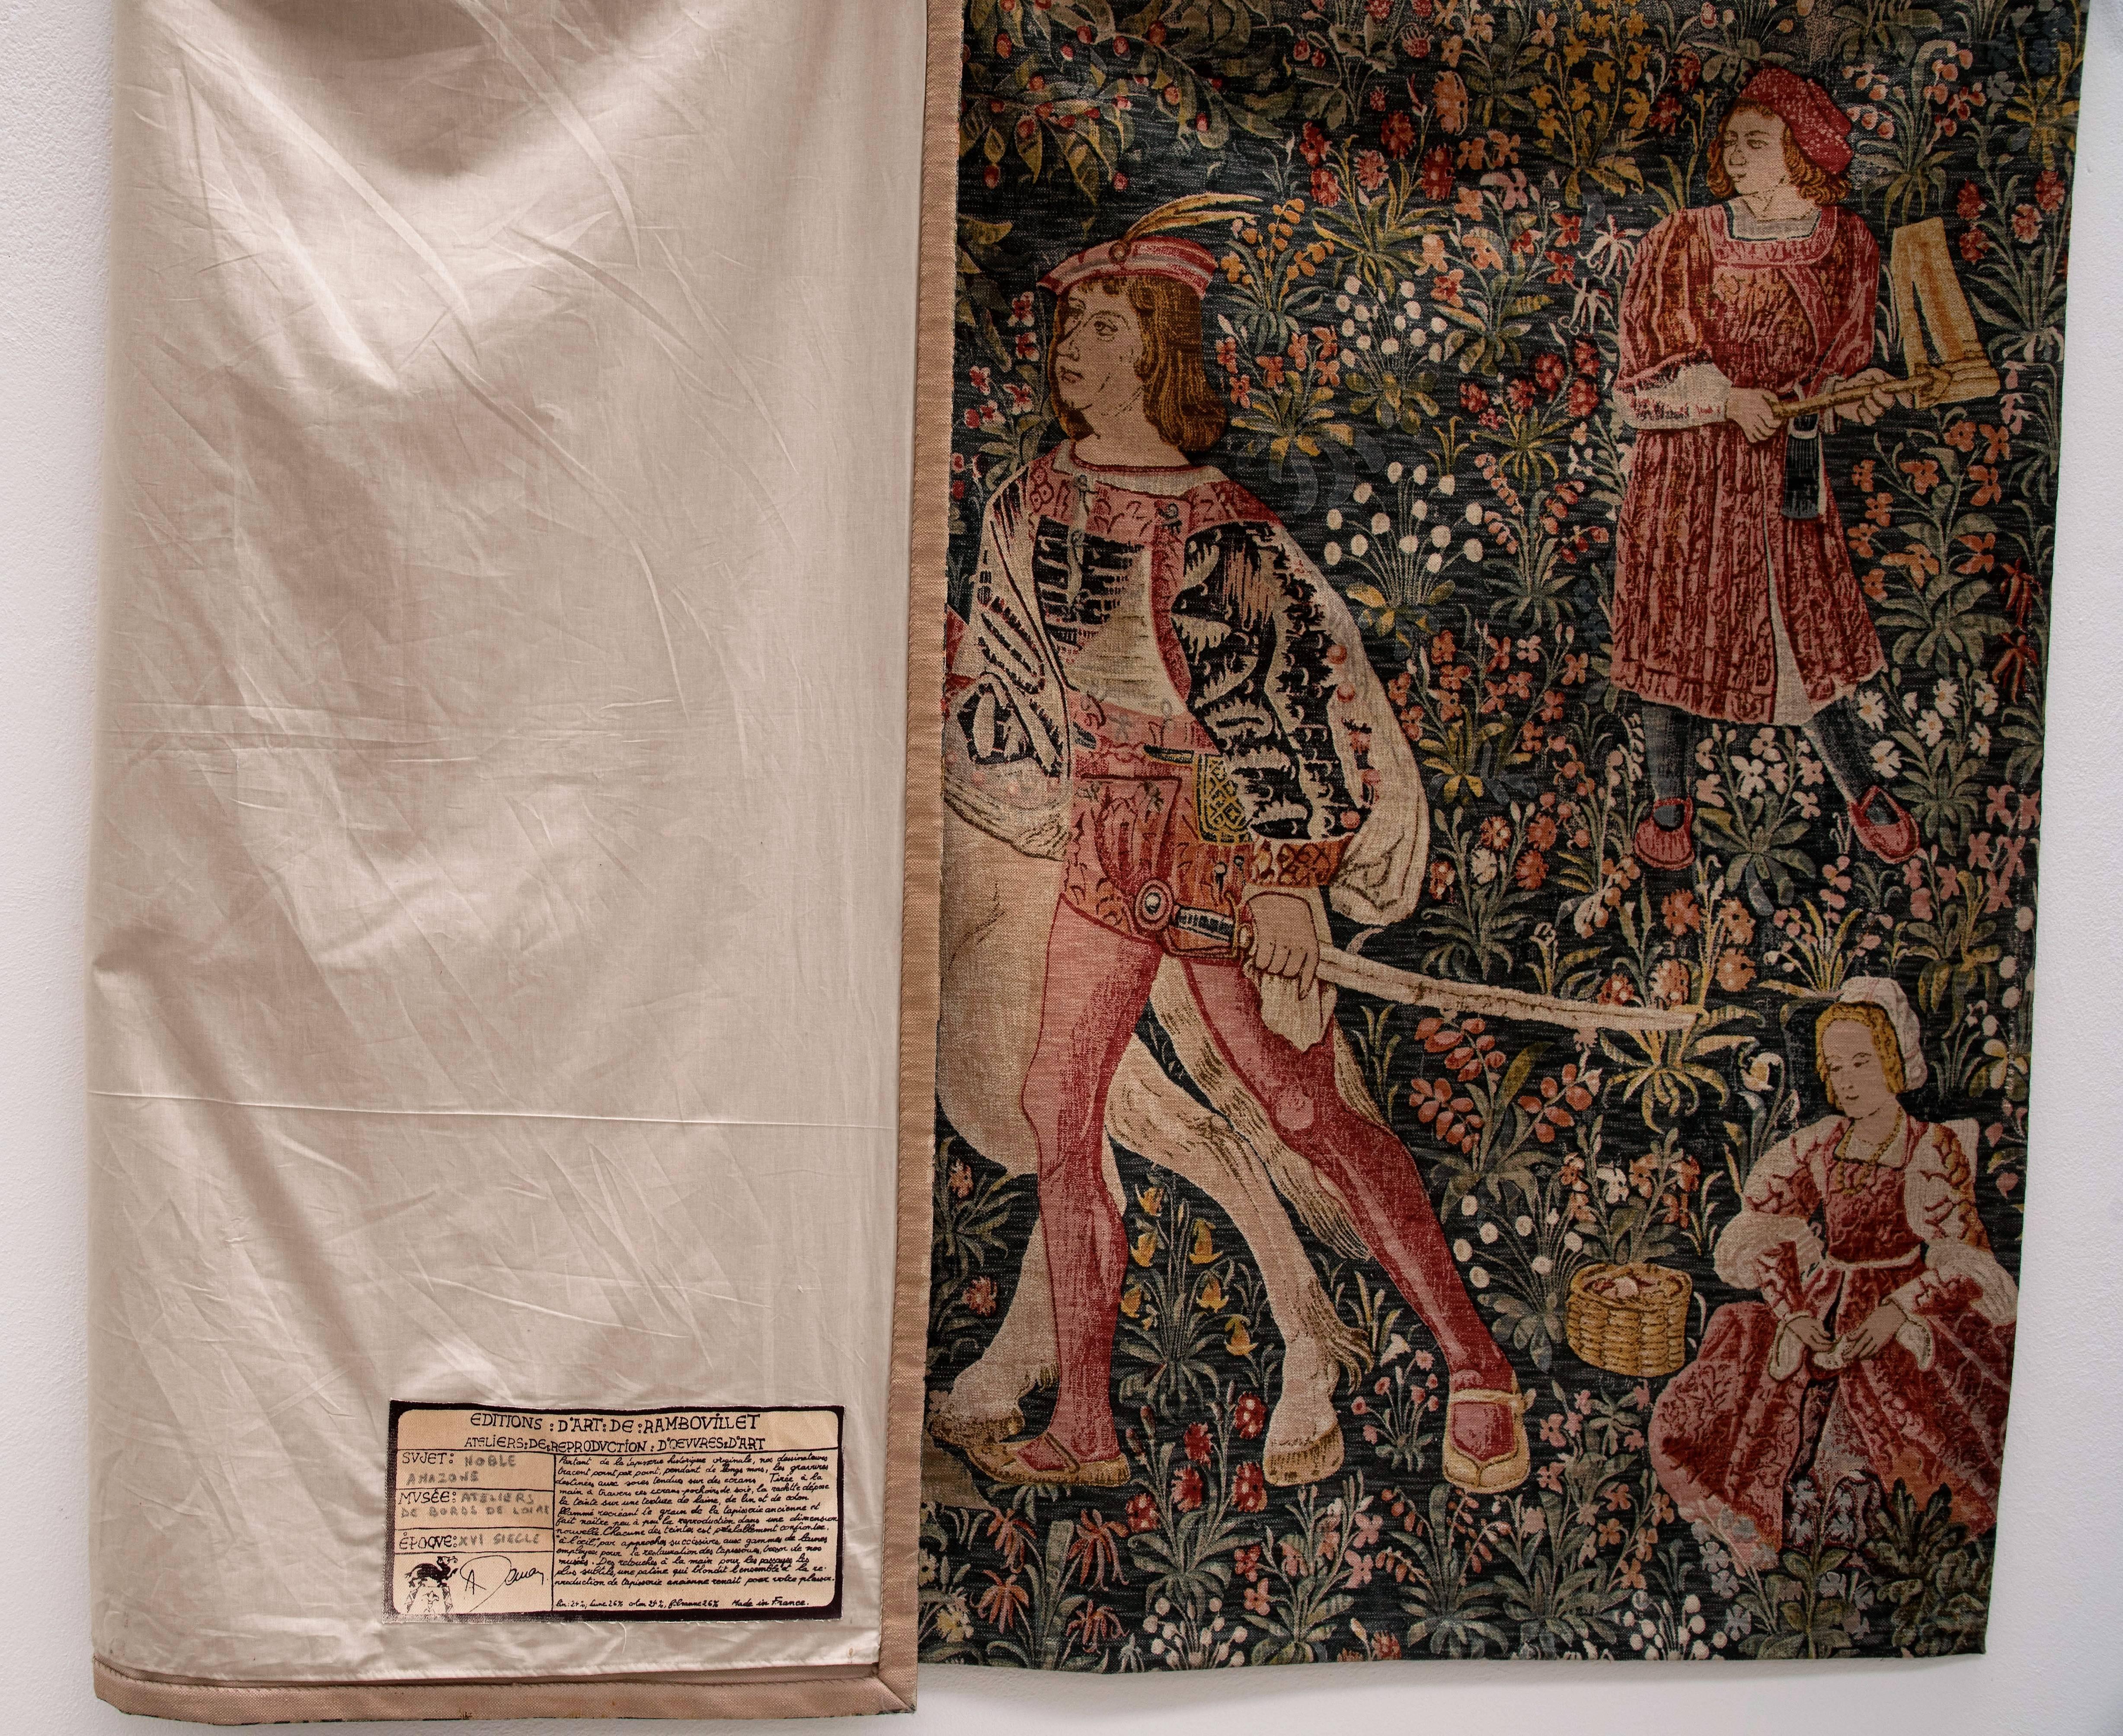 Beautiful French wall tapestry with 16th century representation, manufactured by Ateliers d'Art Rambouillet.